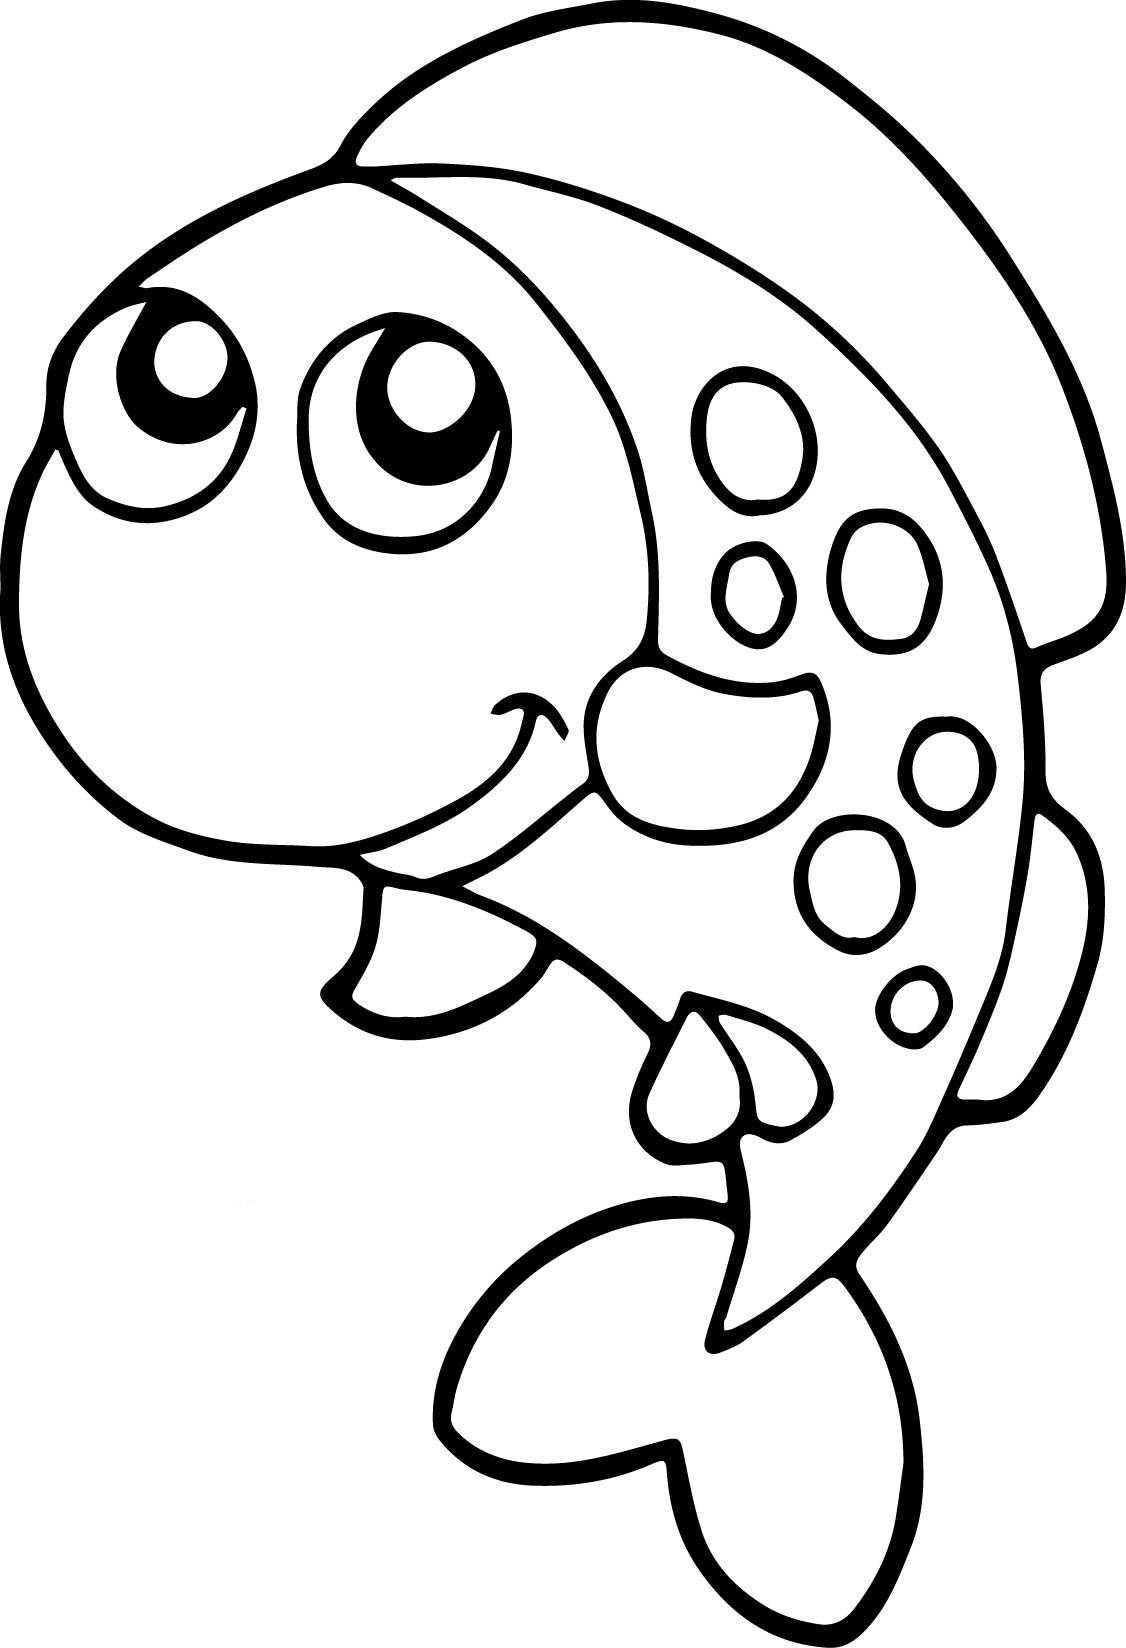 fish coloring for kids fish coloring page for kids 2 preschool crafts coloring for kids fish 